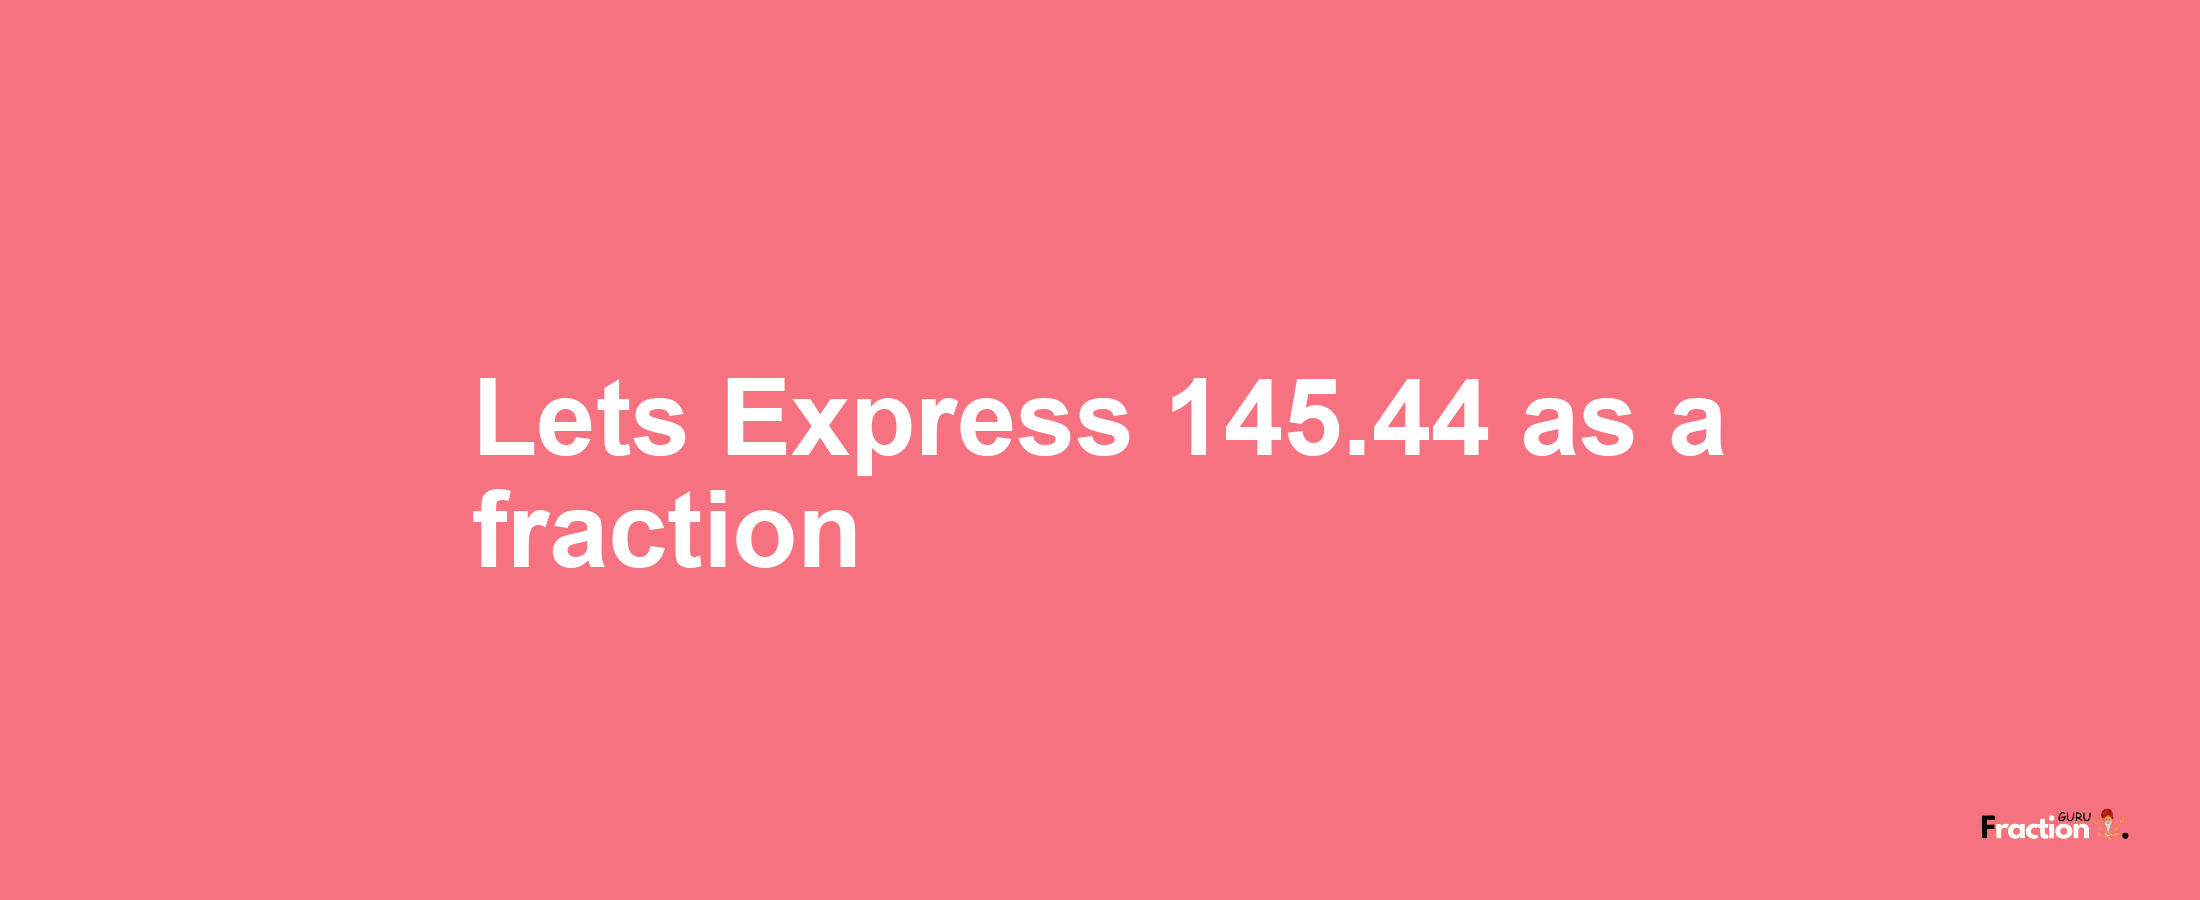 Lets Express 145.44 as afraction